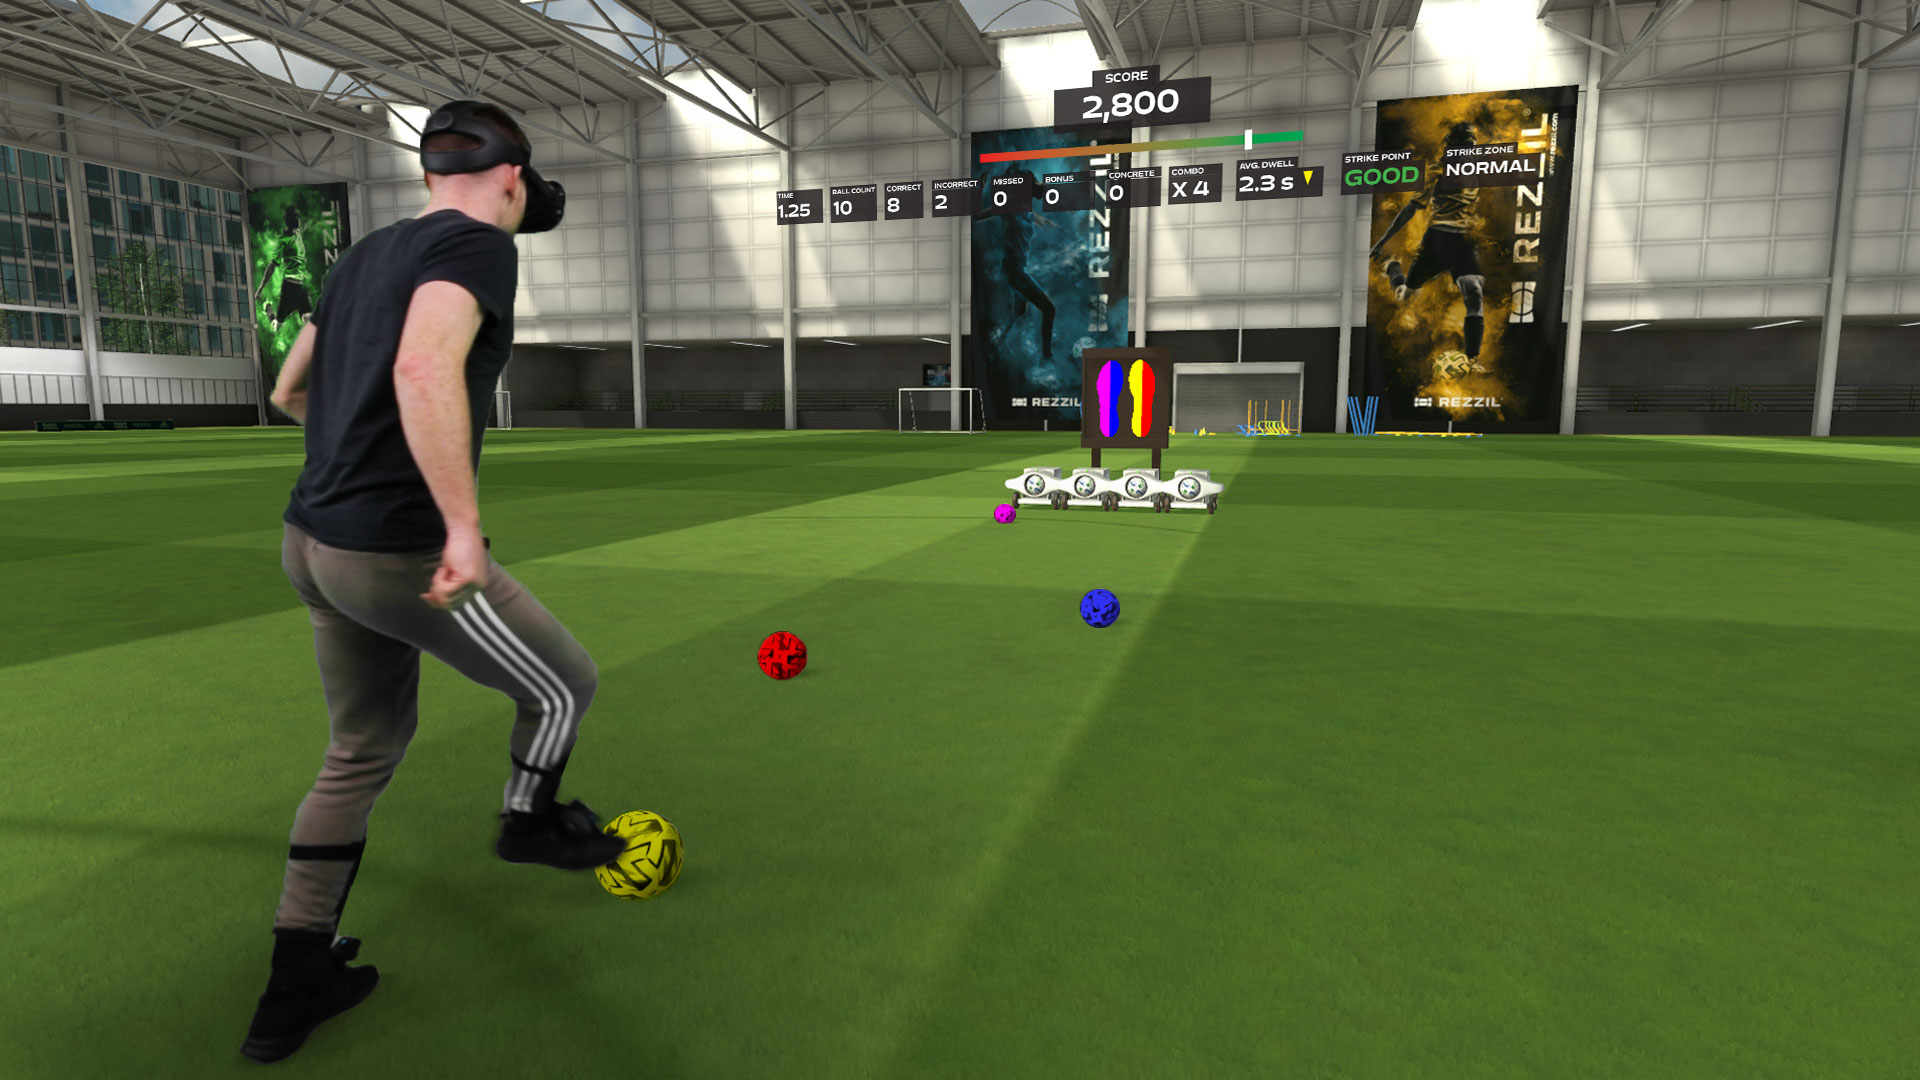 Soccer coaching in VR is extremely a say